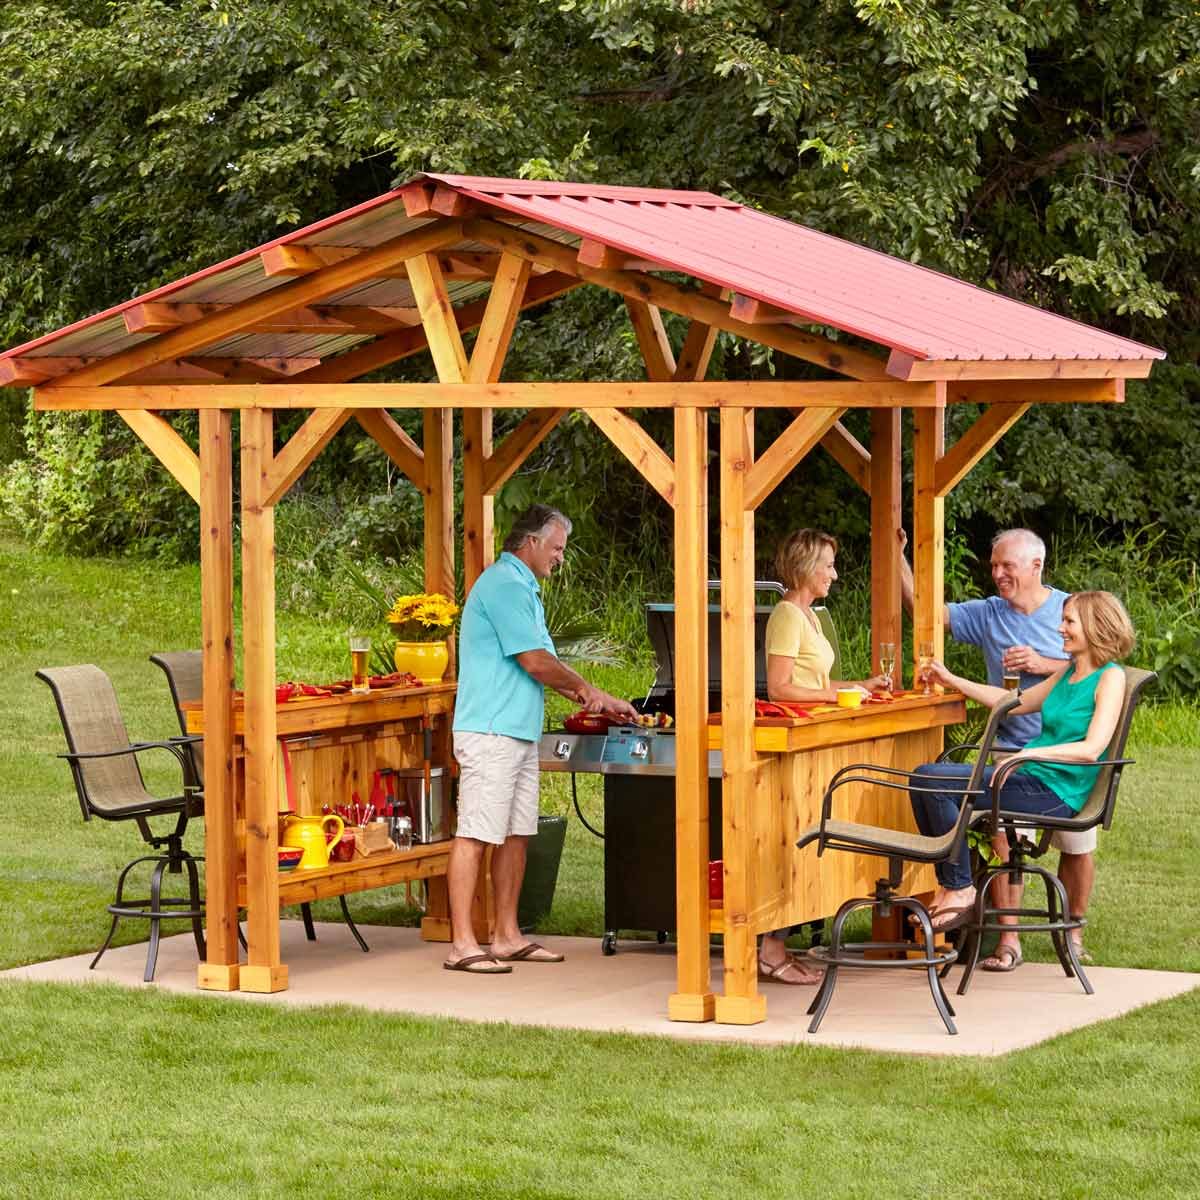 12 Incredible Pieces of DIY Outdoor Furniture — The Family Handyman